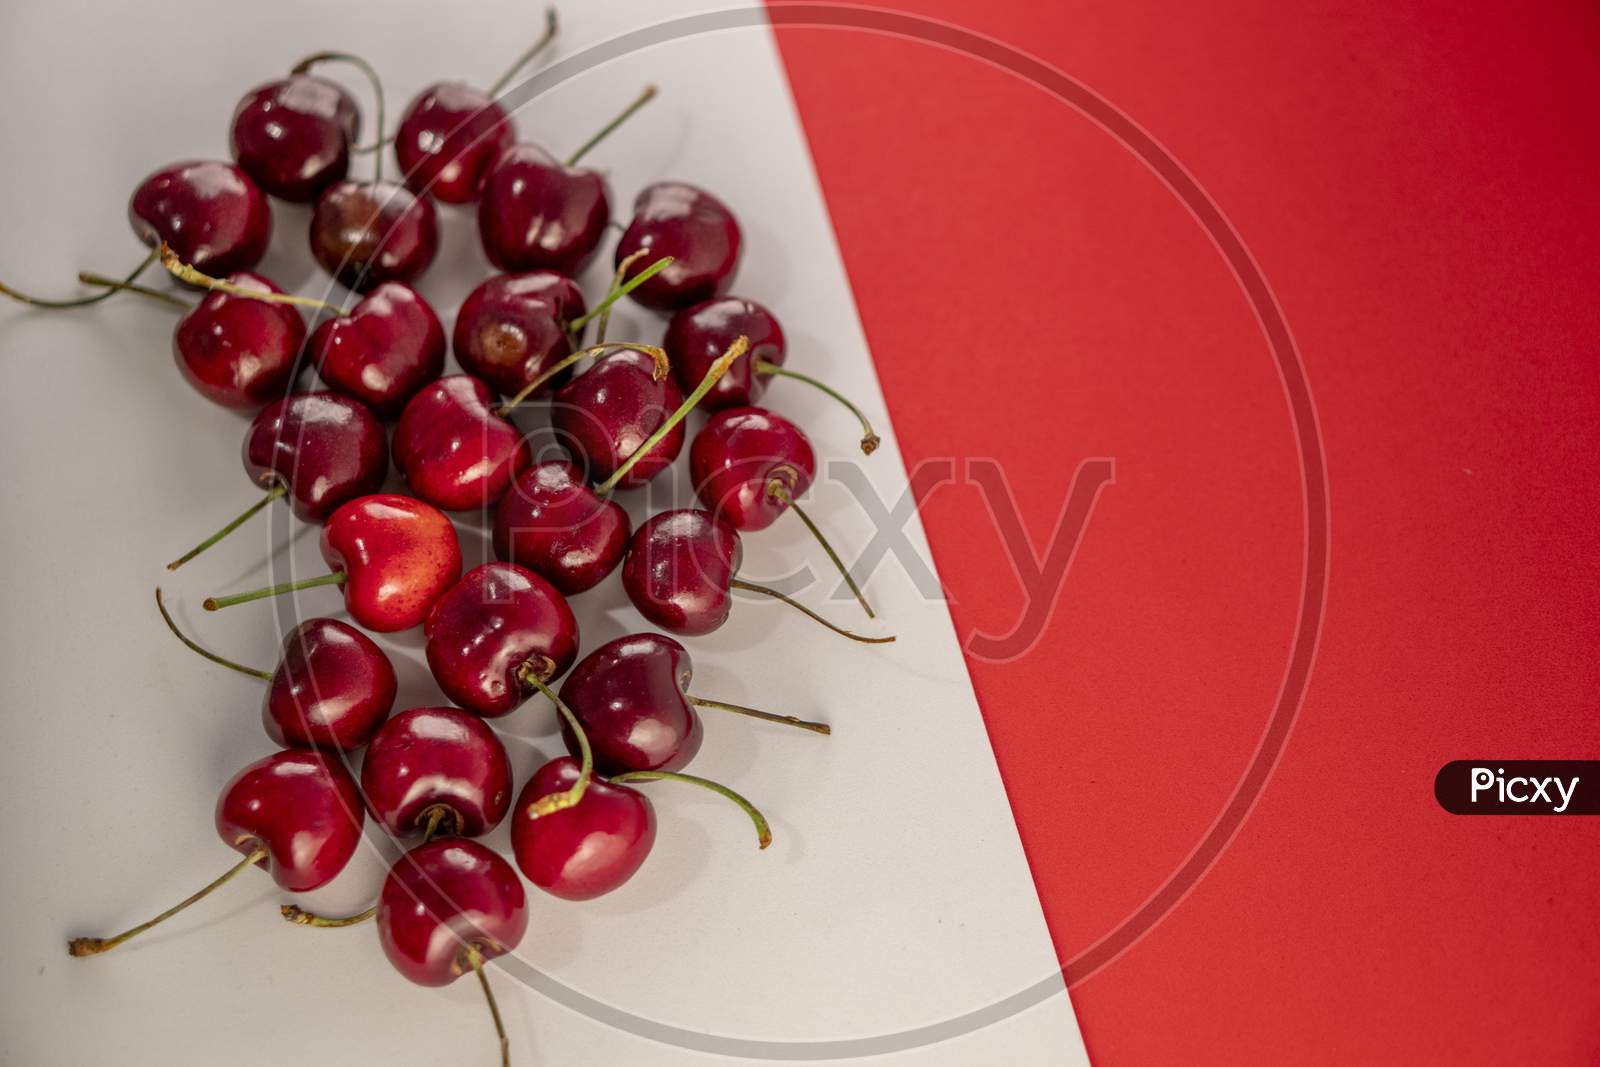 Fresh red cherries on a red and white background. Photo has empty space for text.